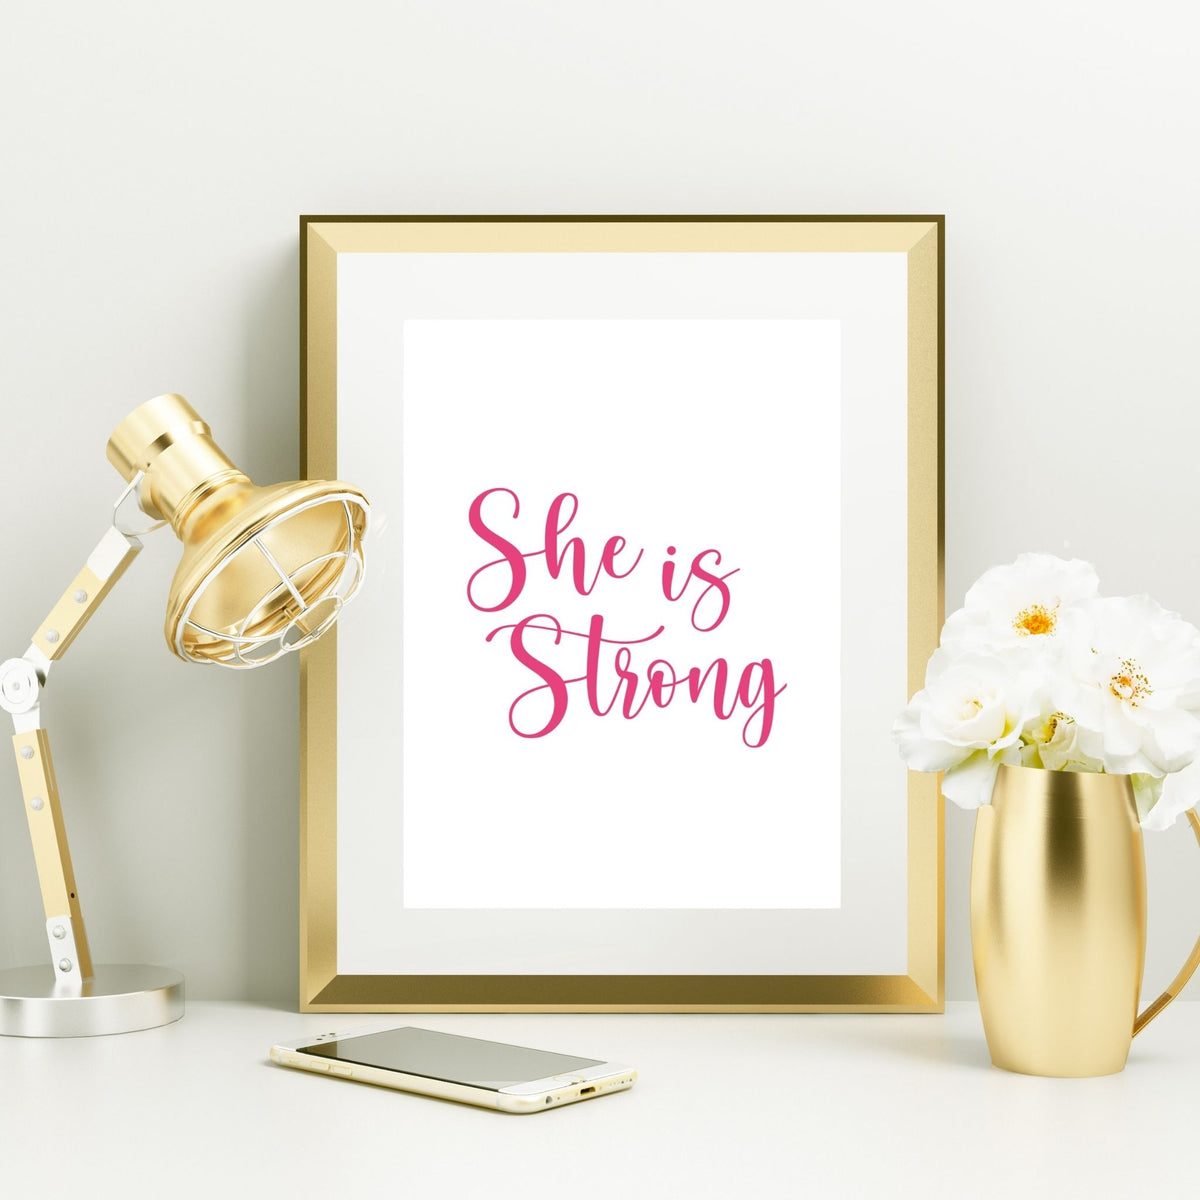 She is Strong (Digital Print)